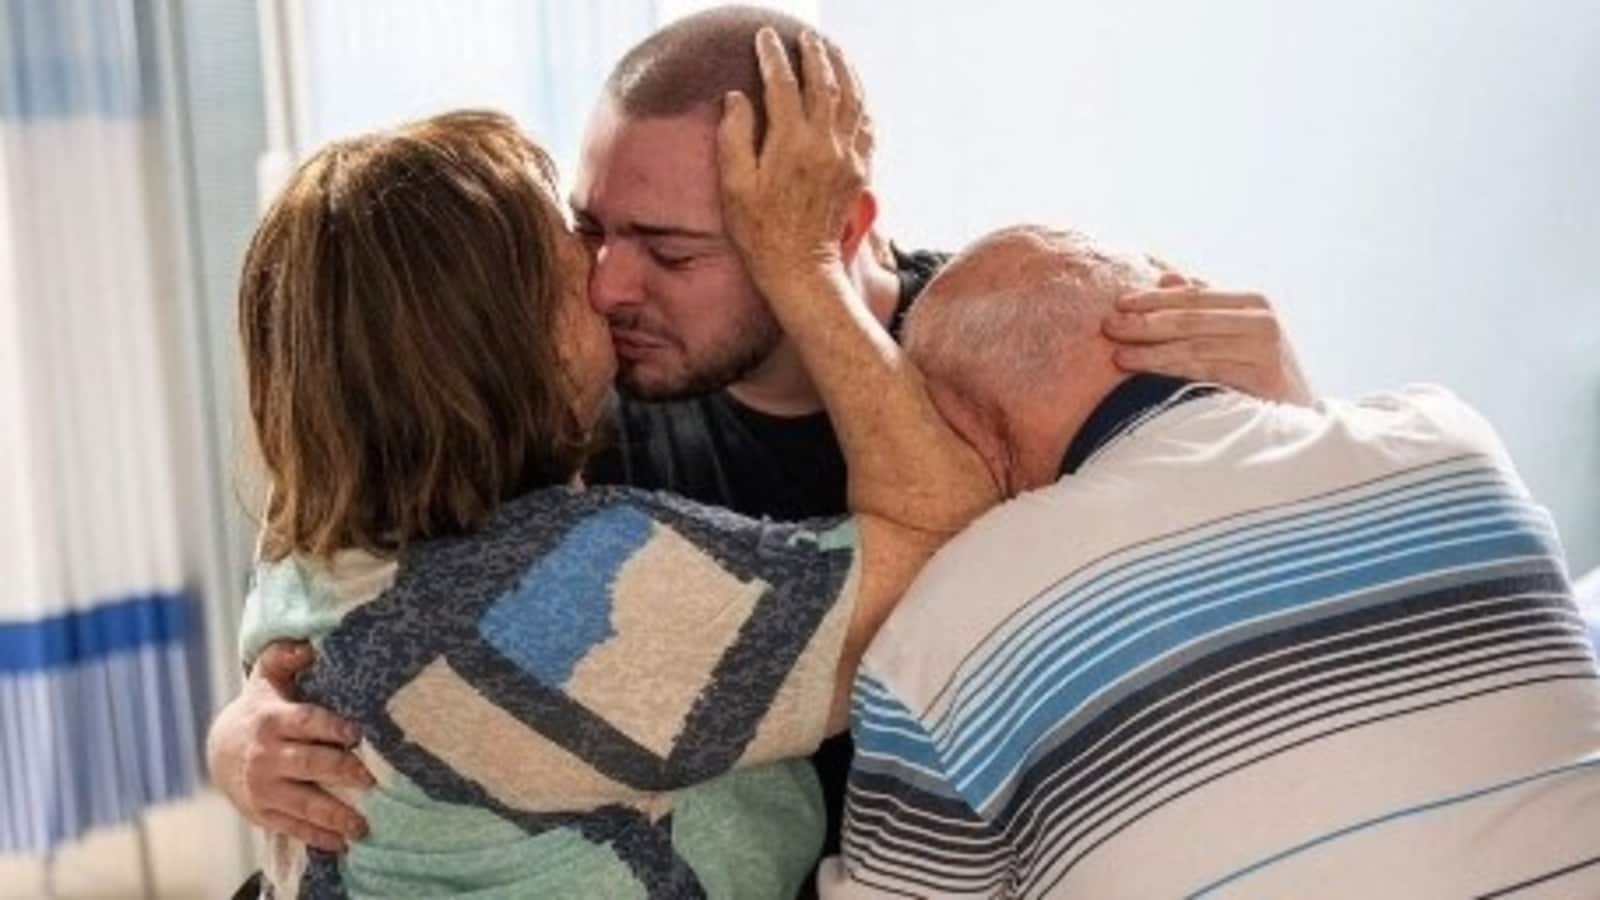 Israeli hostage Almog Meir Jan's father, who lost 20 kgs, ‘died of grief’ just before his son's….